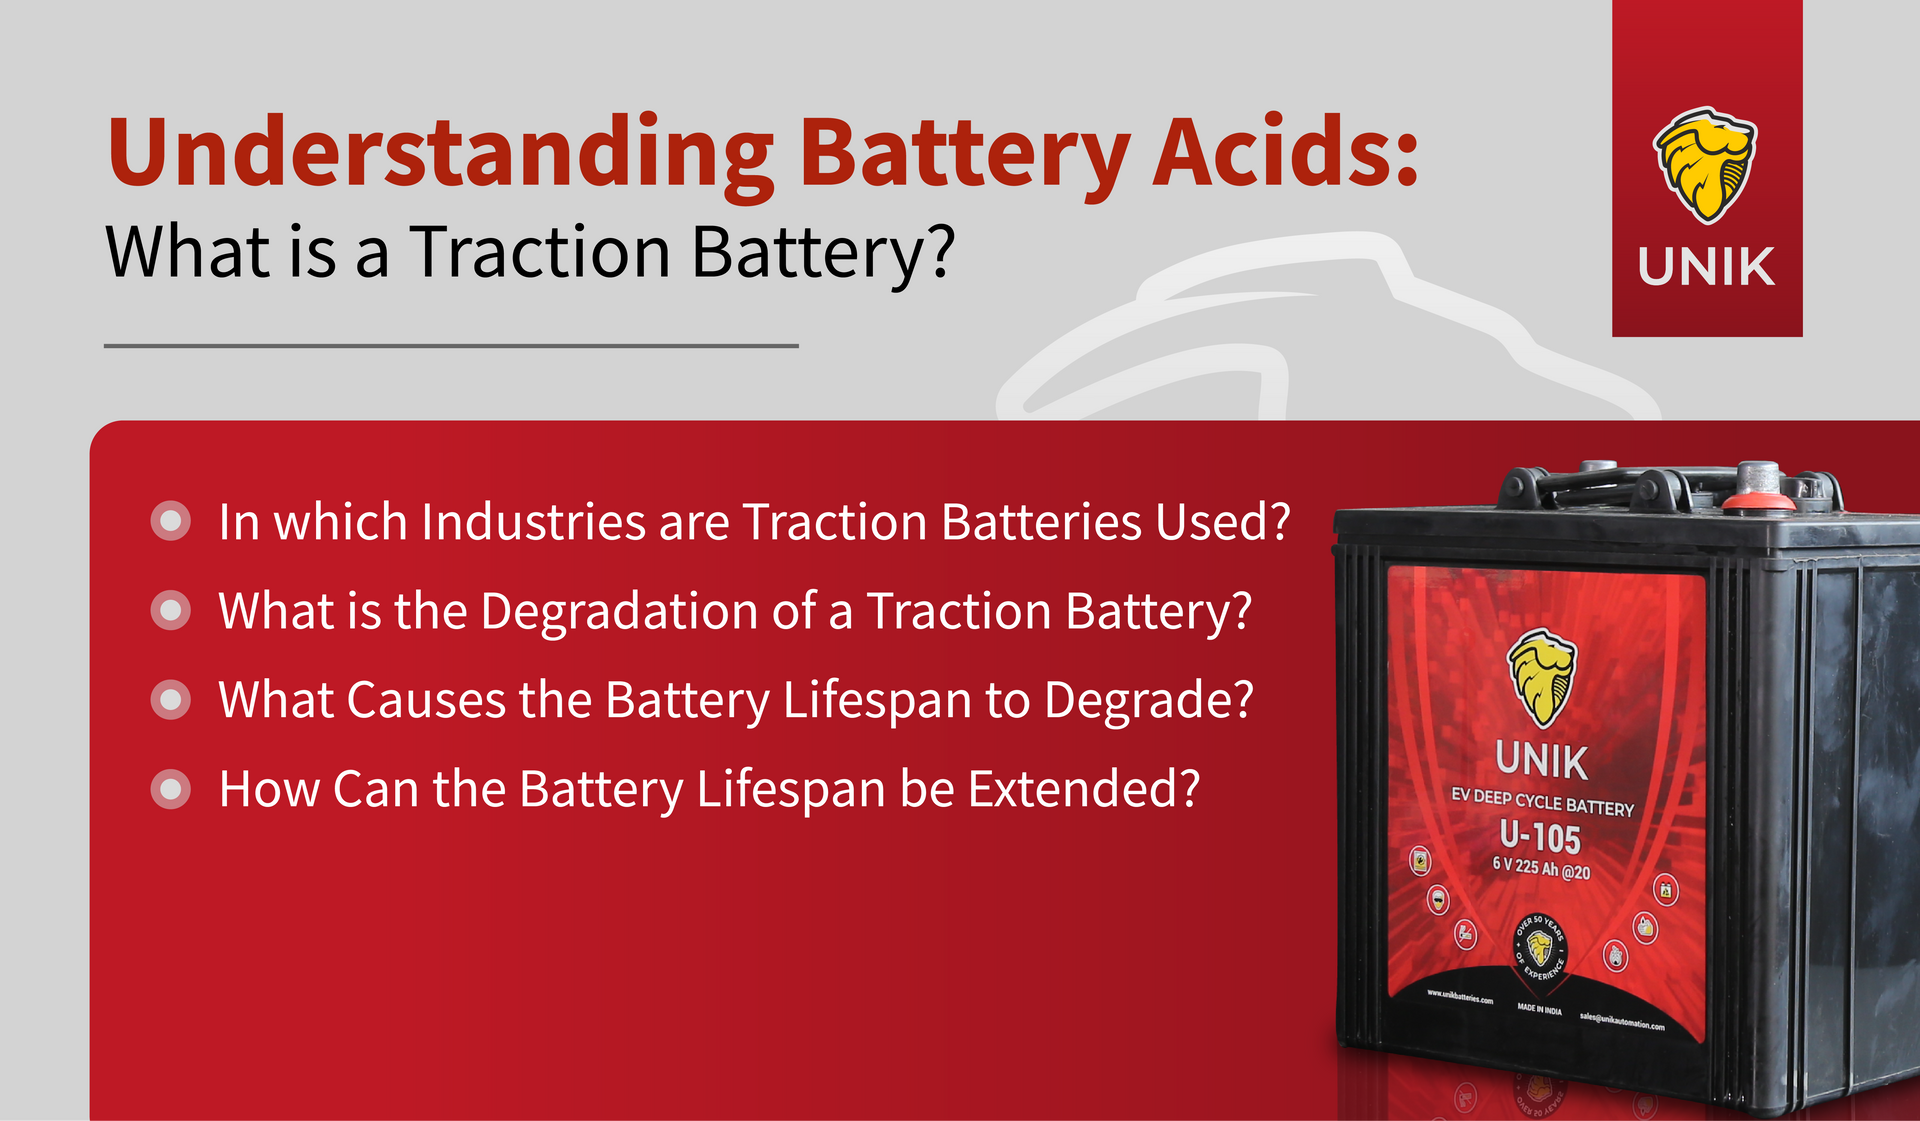 What is a Traction Battery? 

In which Industries are Traction Batteries Used? 